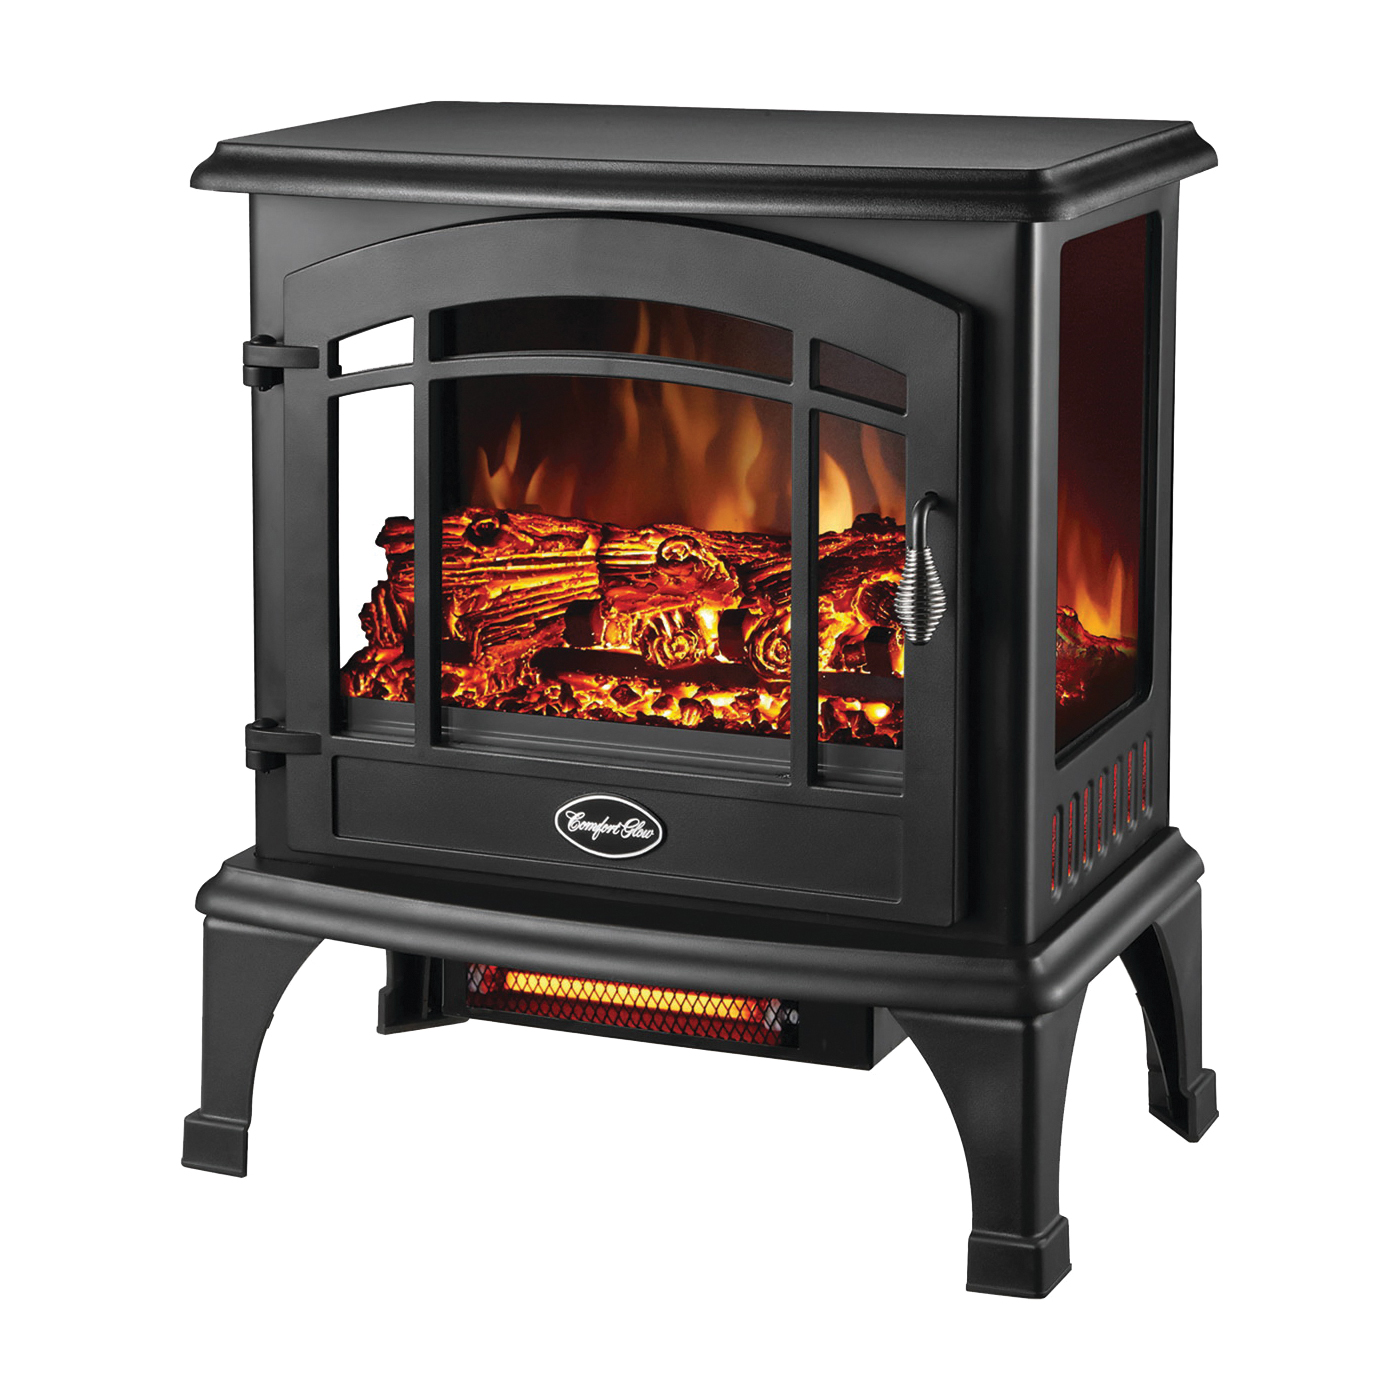 EQS5140 Electric Stove, 120 V, Thermostat Control, Steel, Black